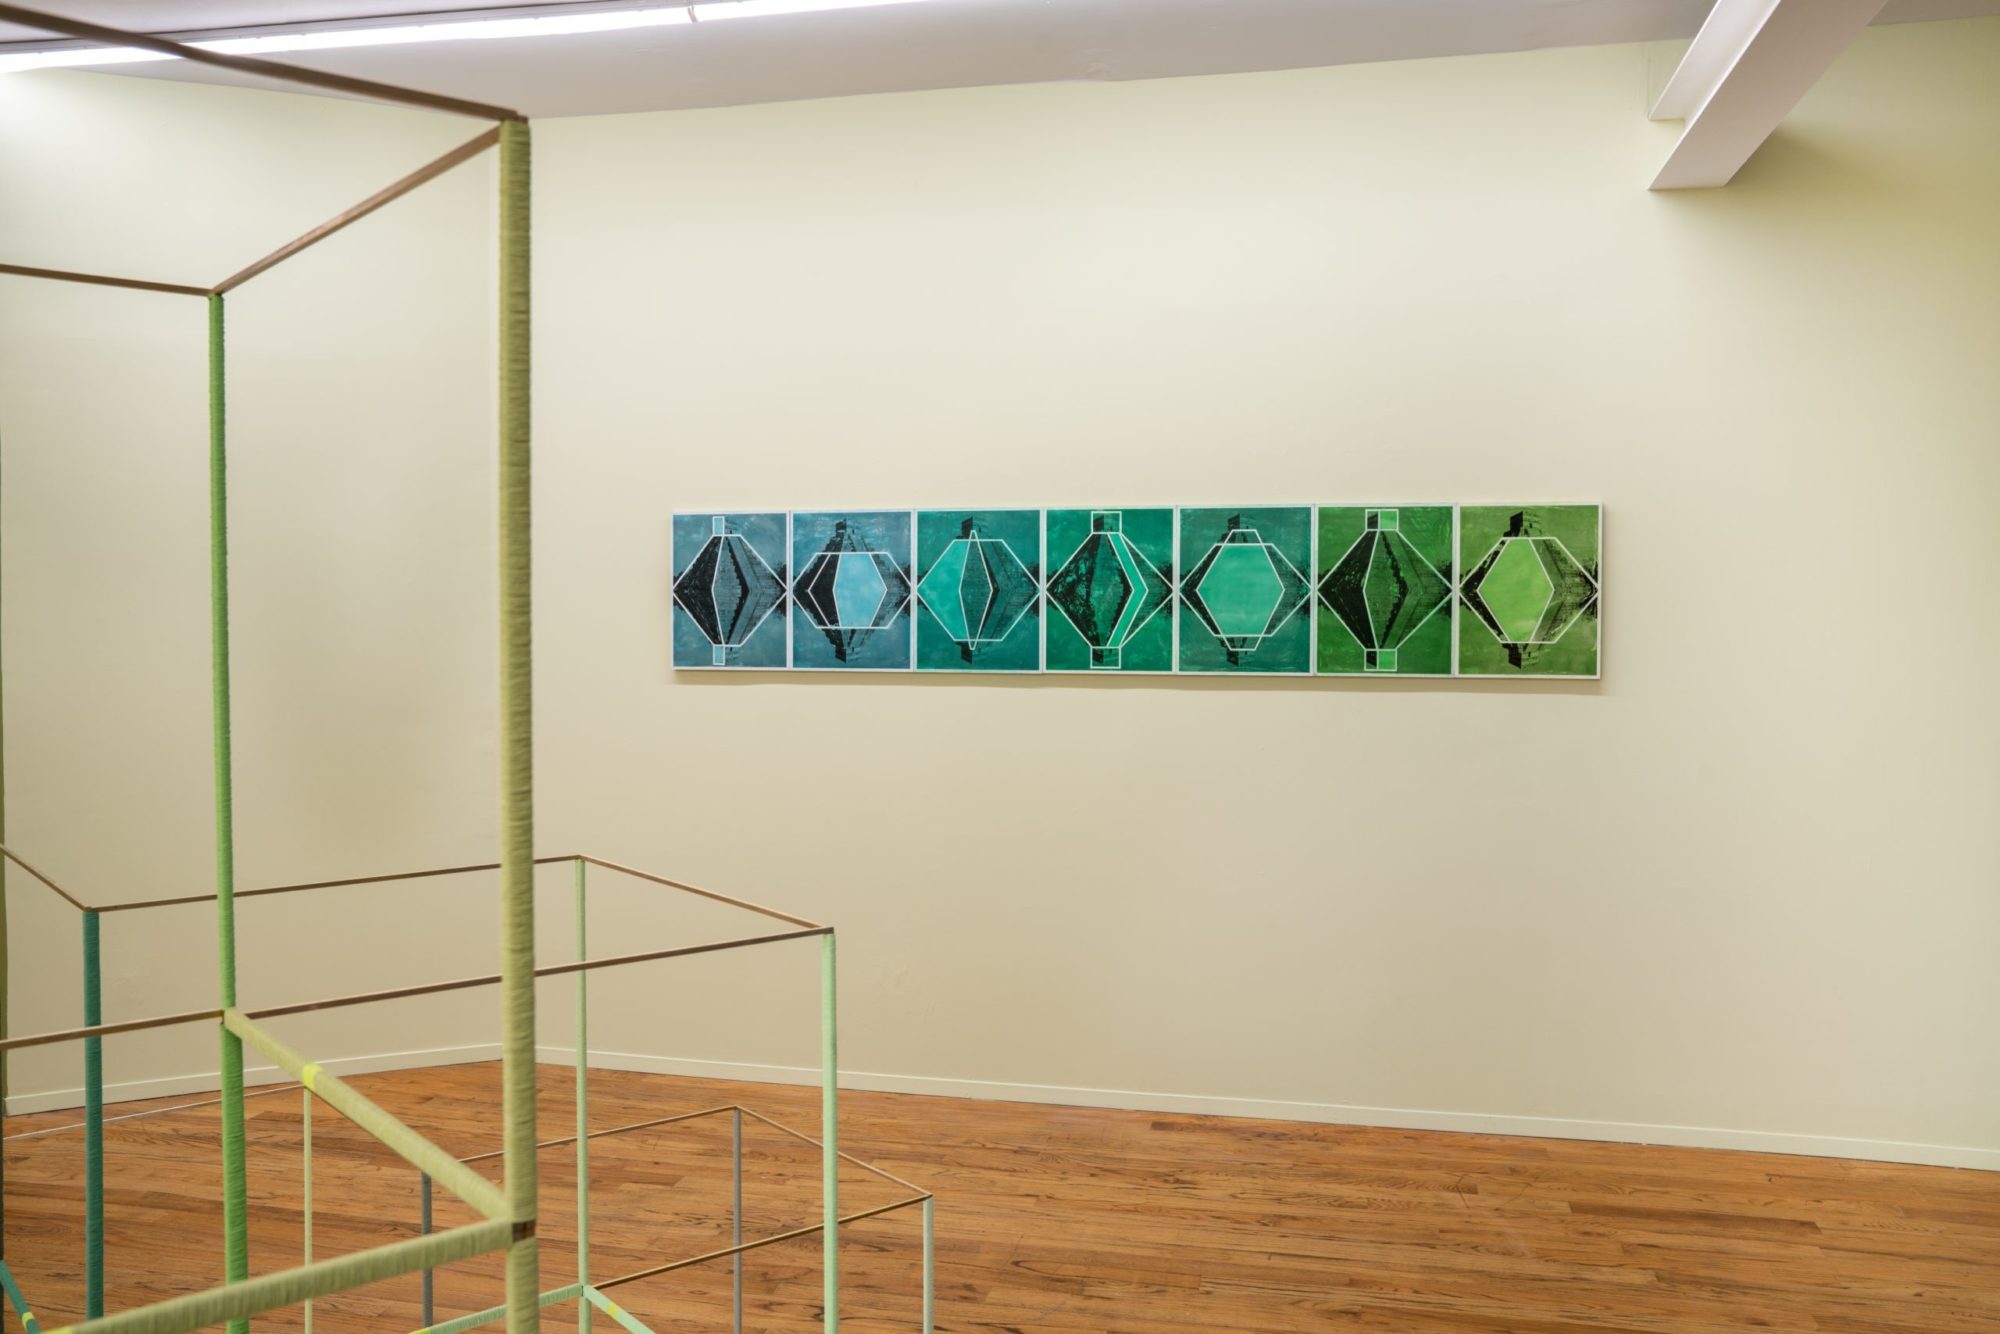 A series of seven wax panels with white lines creating geometric shapes over hues of blue and green. From left to right the blue fades into green, with the shapes changing in each panel meant to represent the movement of the sun on a water surface.